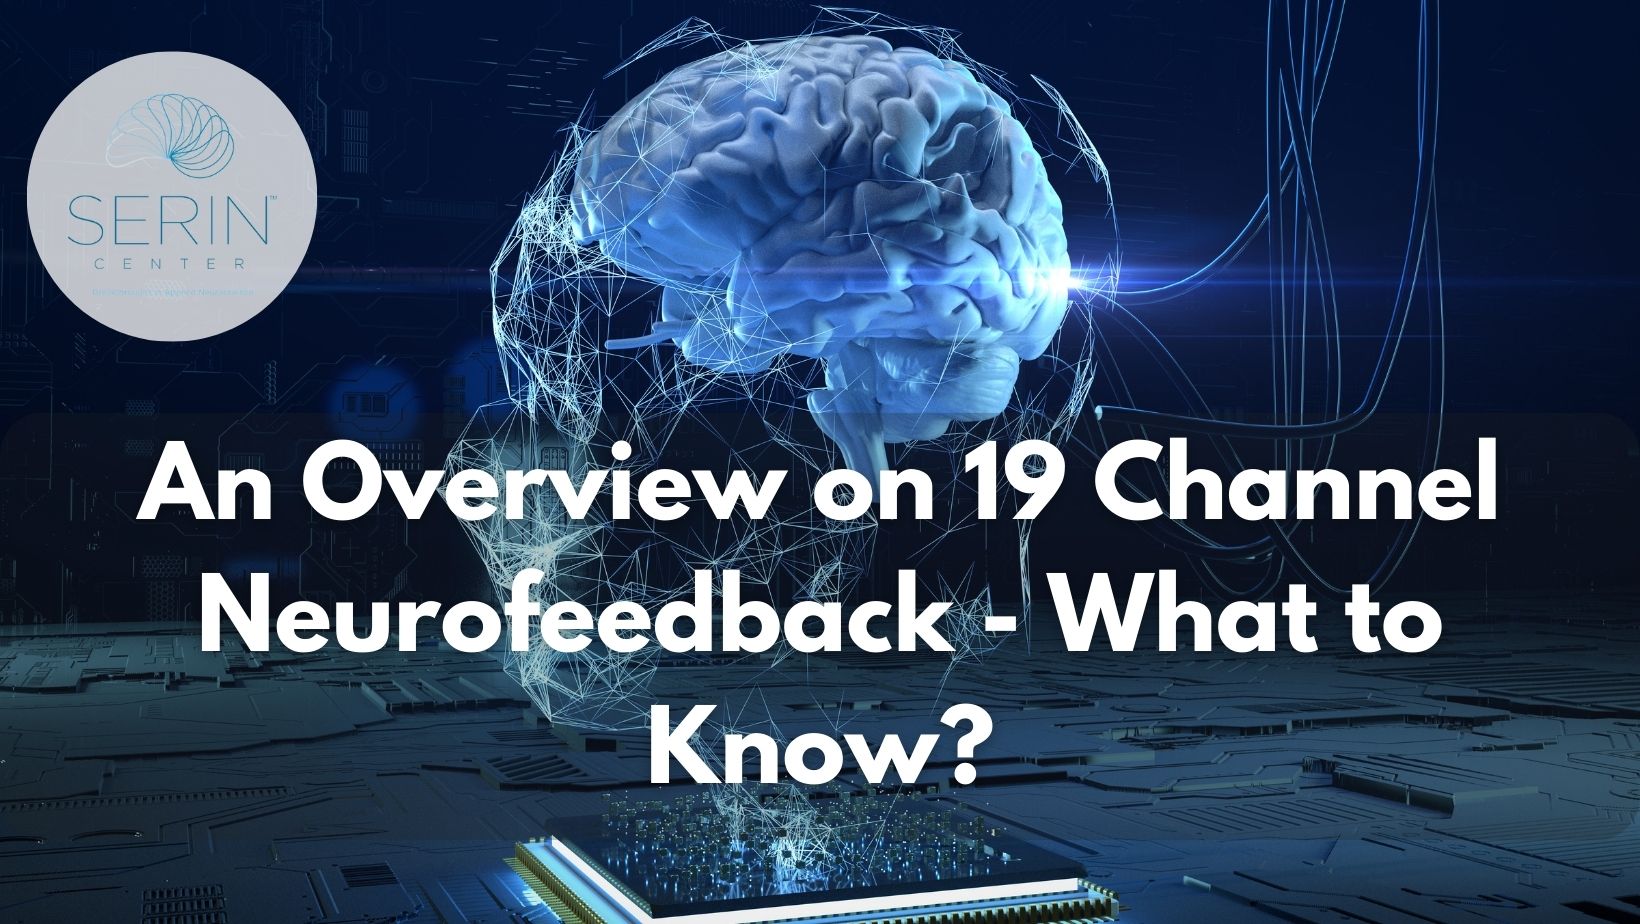 An overview of 19 Channel Neurofeedback - what to know about this advanced form of neurofeedback therapy.